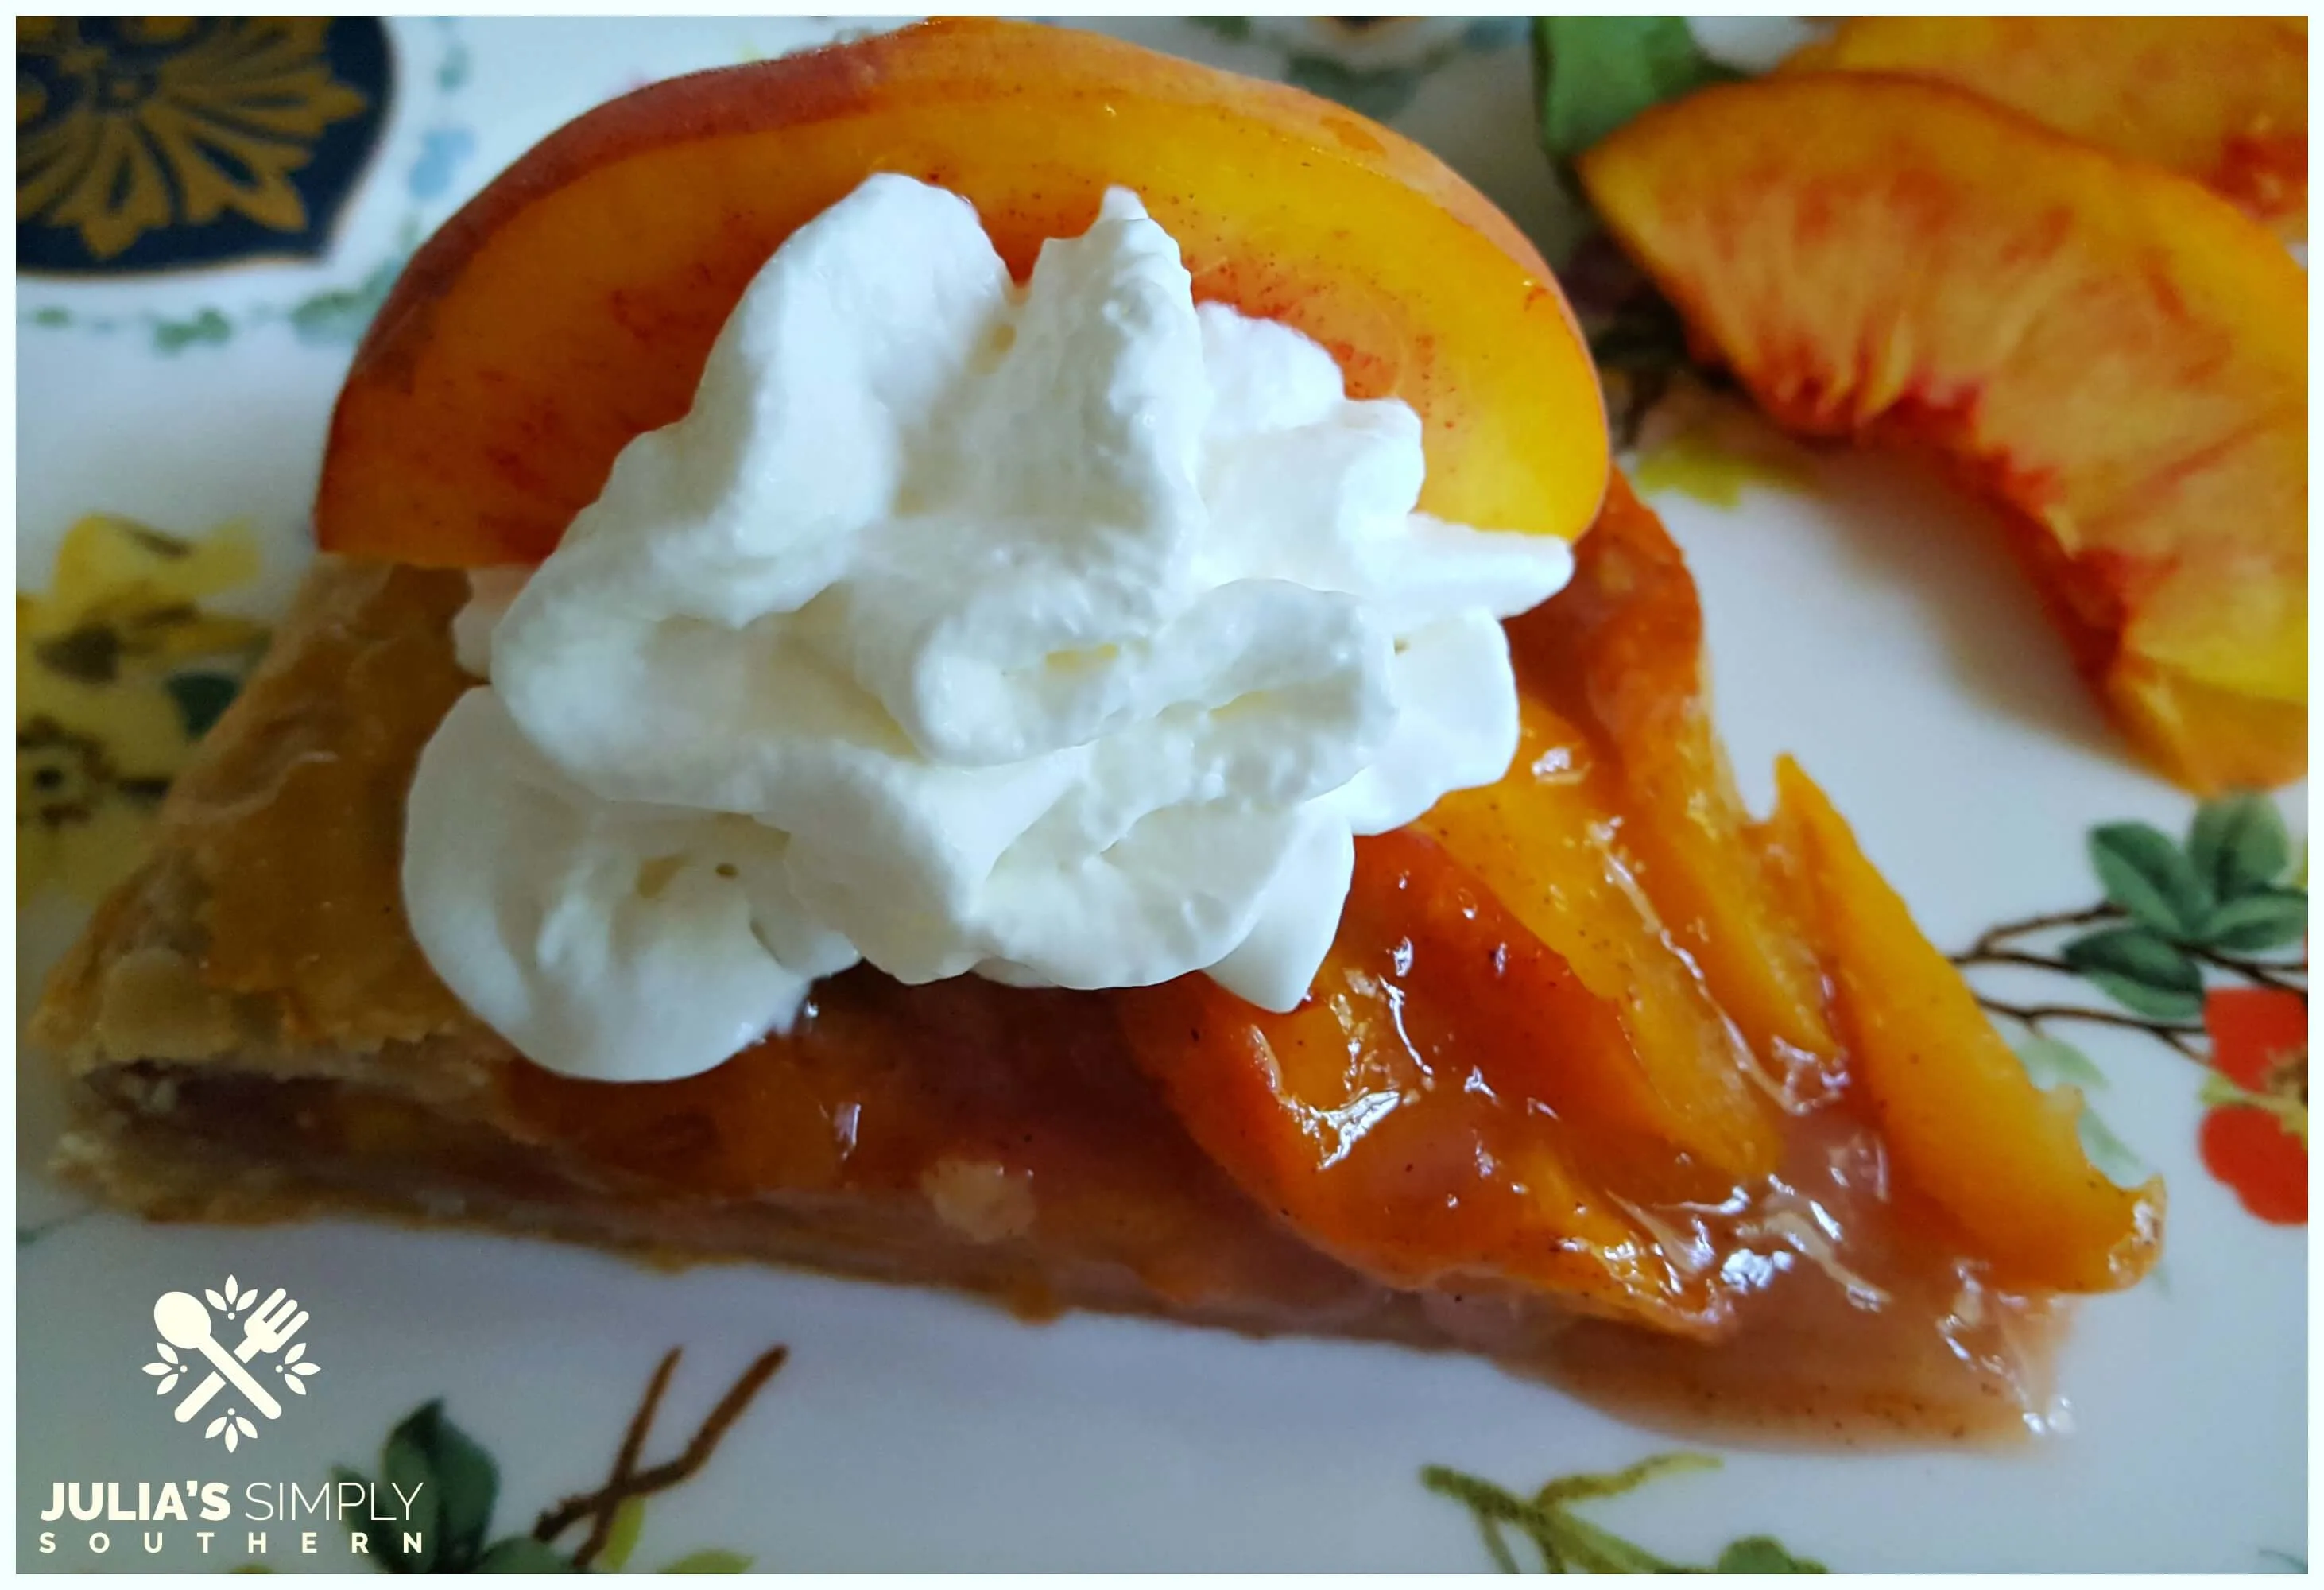 Slice of peach galette with whipped cream and a slice of fresh peach for garnish on a Vanderbilt china plate